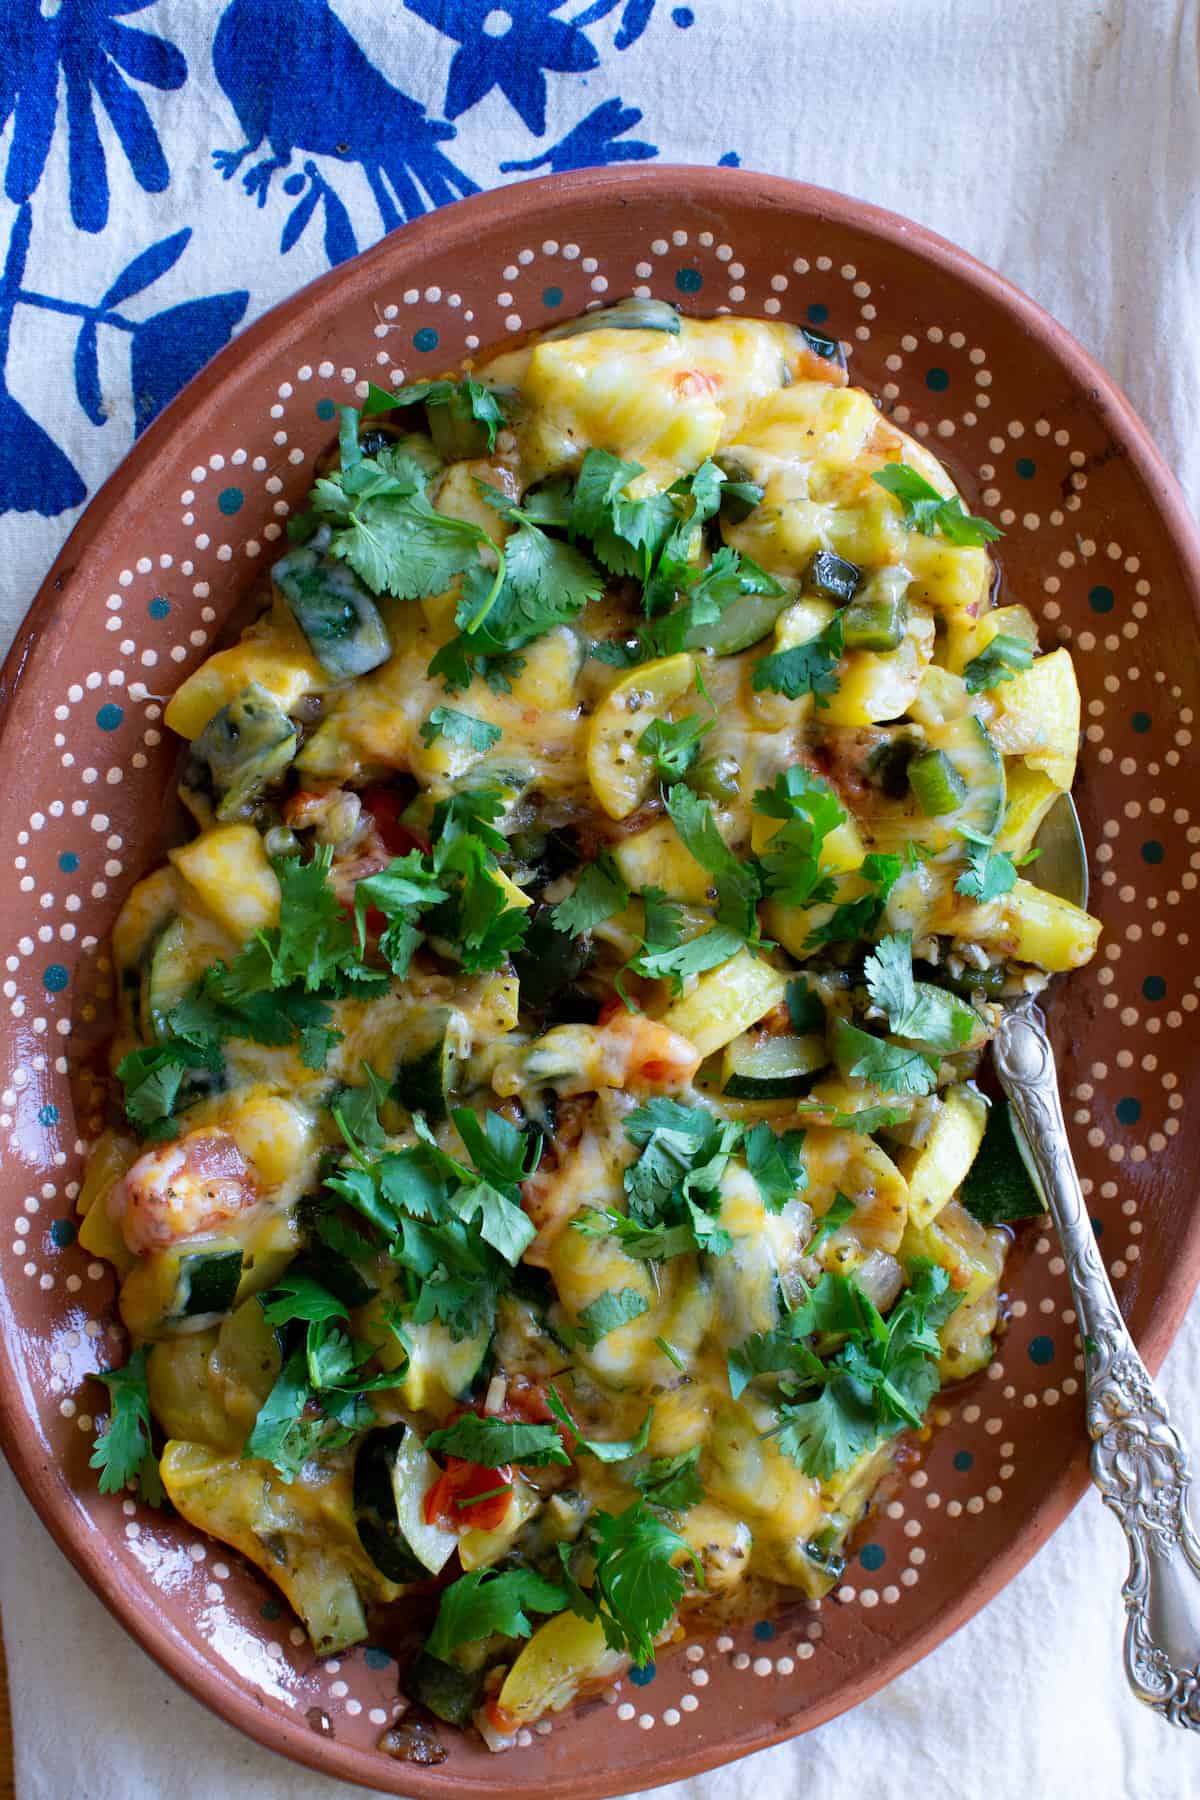 Zucchini is anything but boring when when given the Mexican treatment of a quick sauté then a showering of melty cheese like this classic Calabacitas recipe. #calabacitas #zucchinirecipe #vegetarianmexican #mexicanfood #holajalapeno